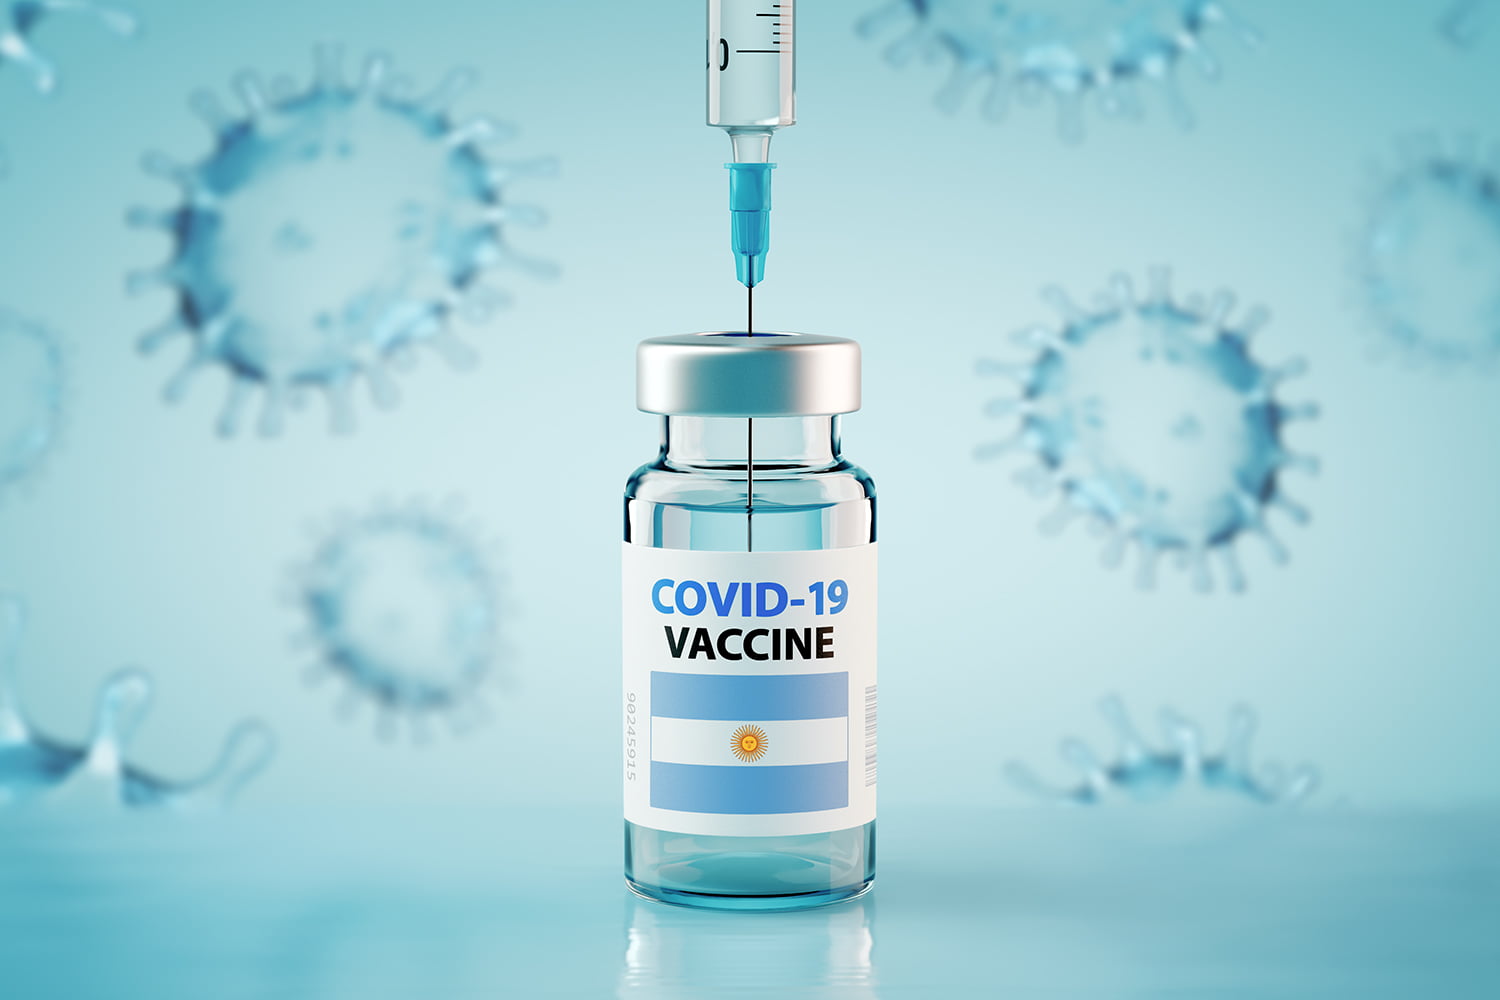 COVID-19 Coronavirus Vaccine and Syringe with flag of Argentina Concept Image